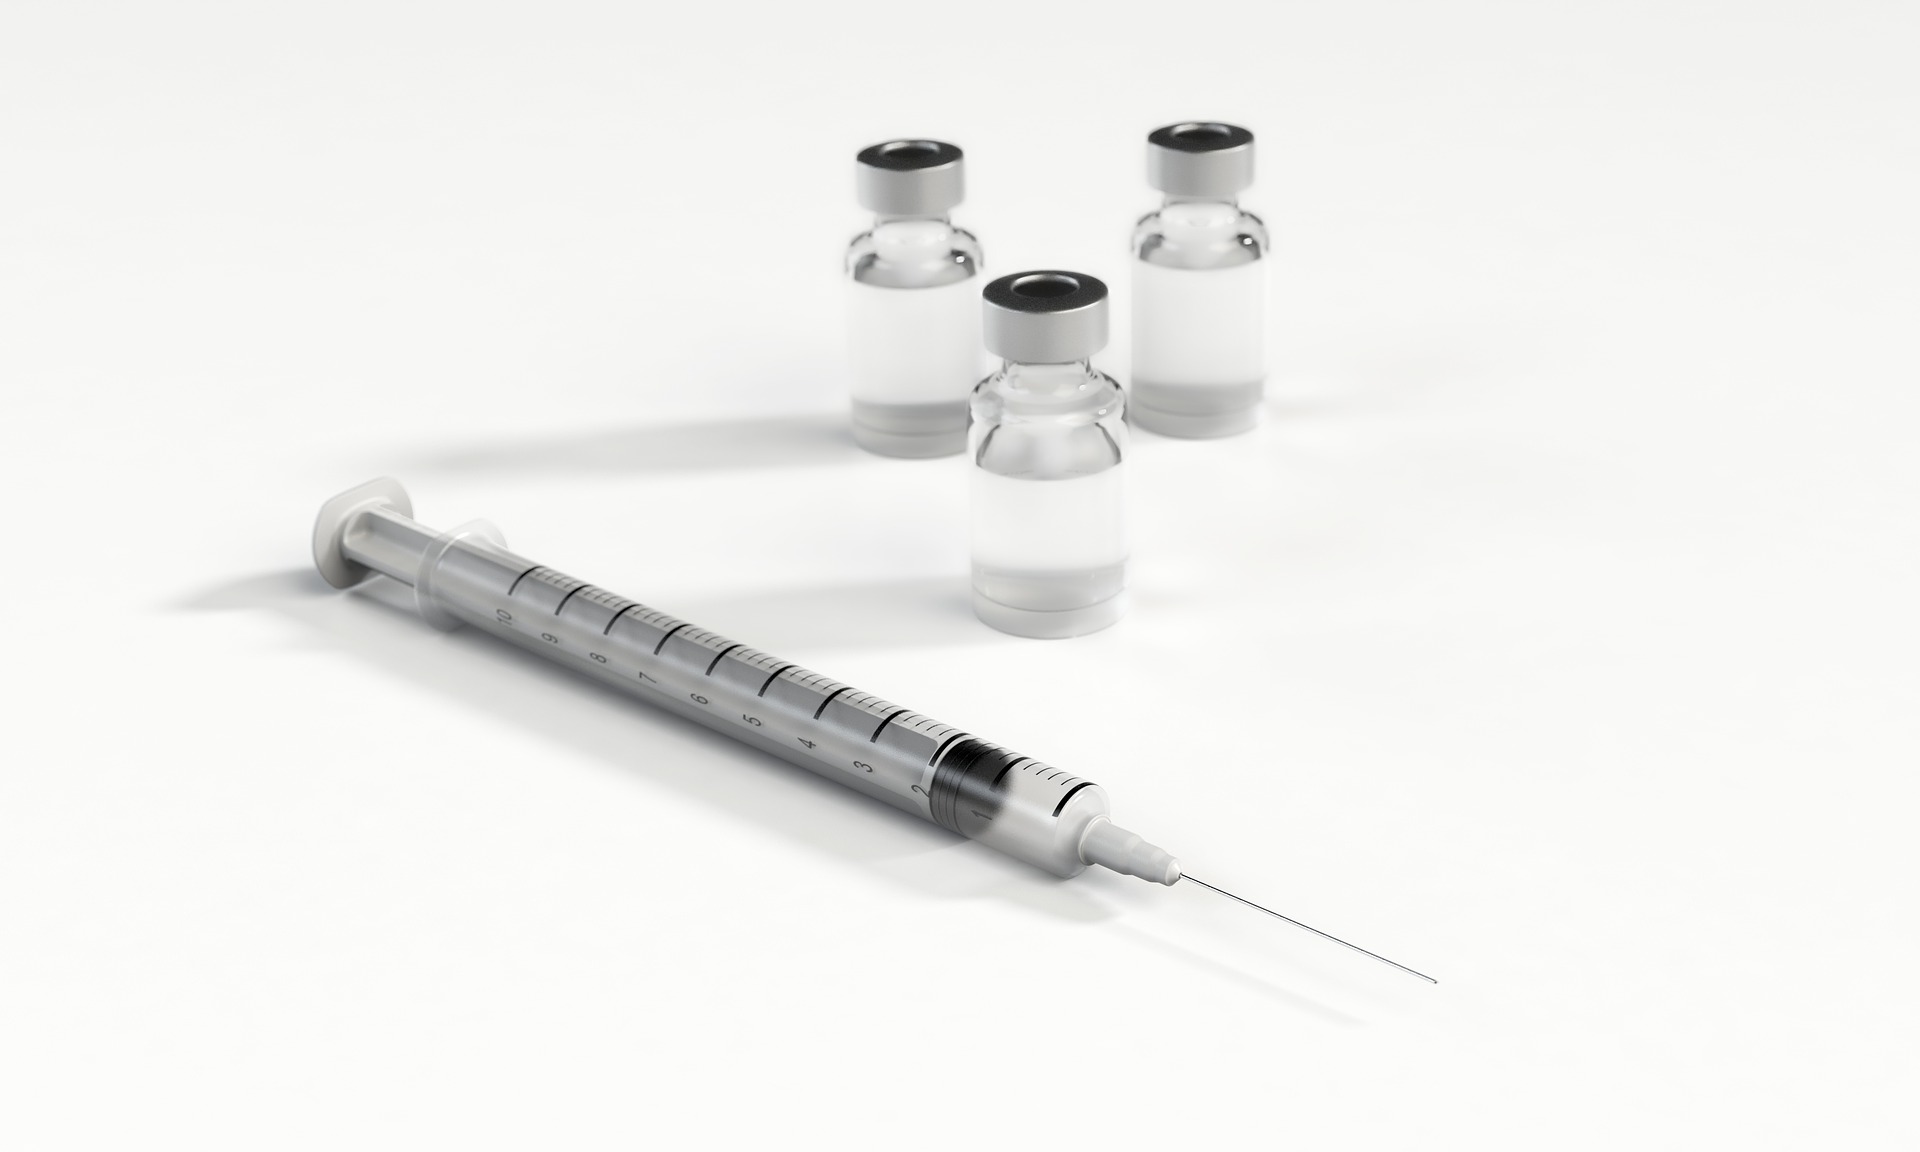 Some Guidance on COVID Vaccines